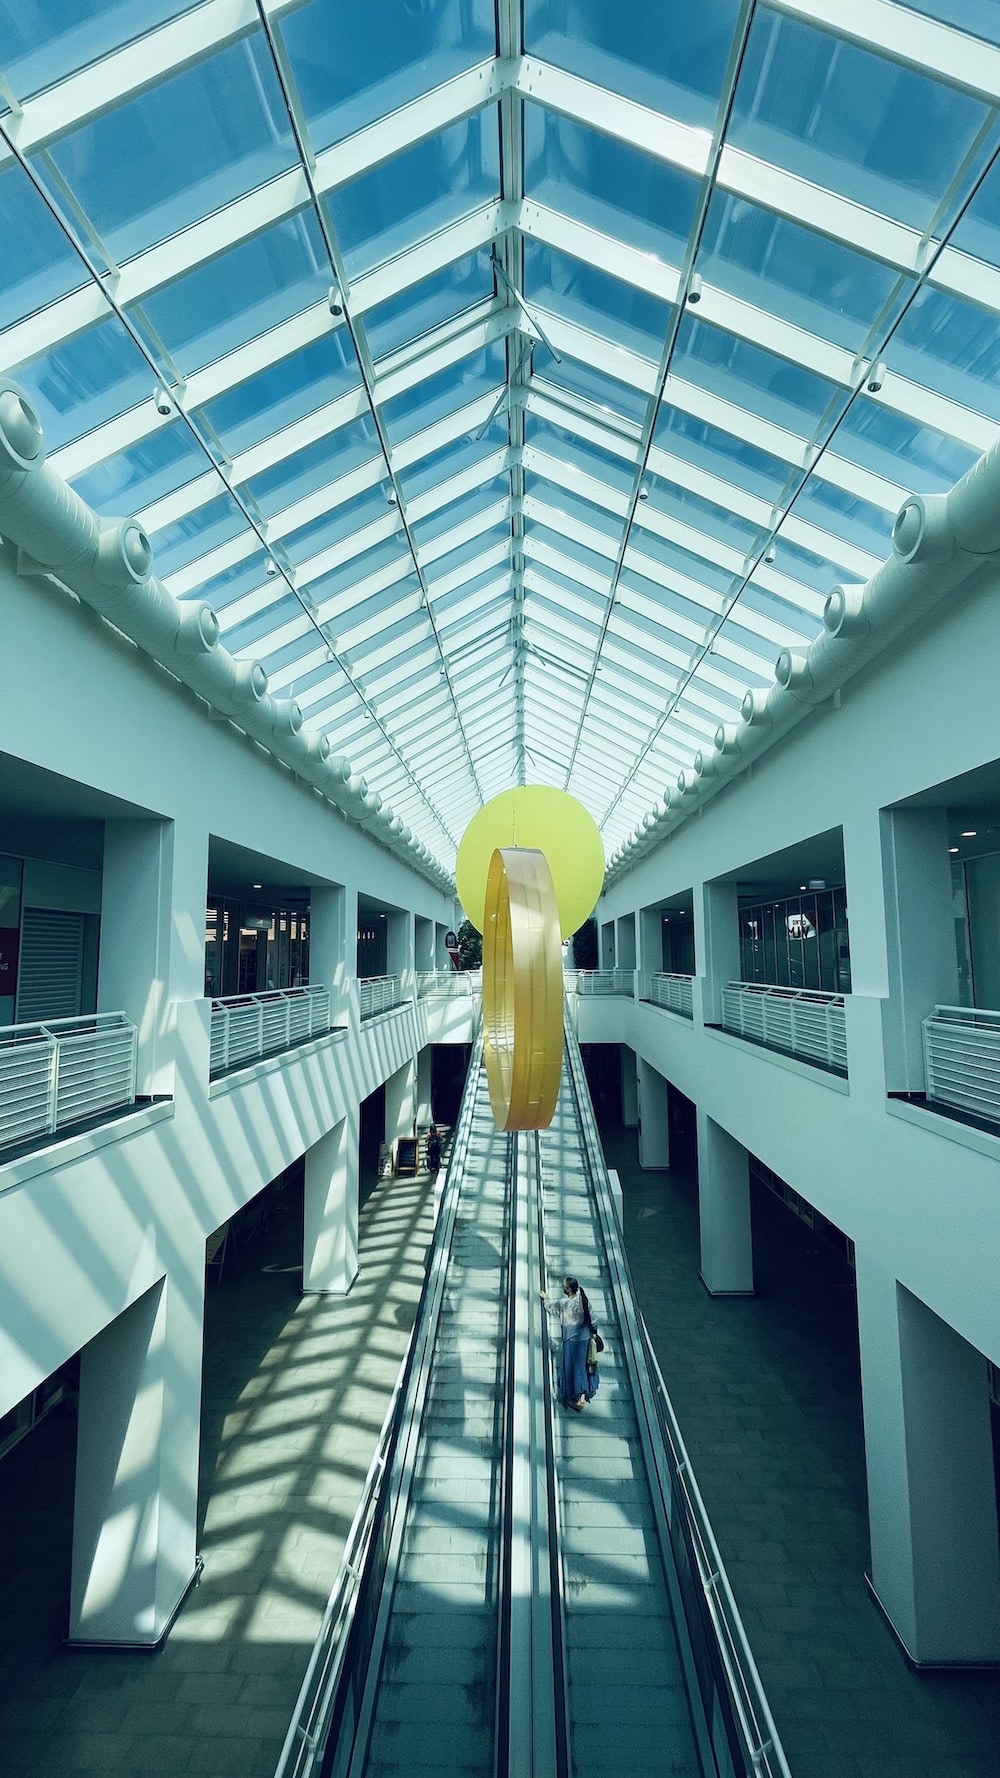 an escalator in a building with a large yellow object hanging from the ceiling